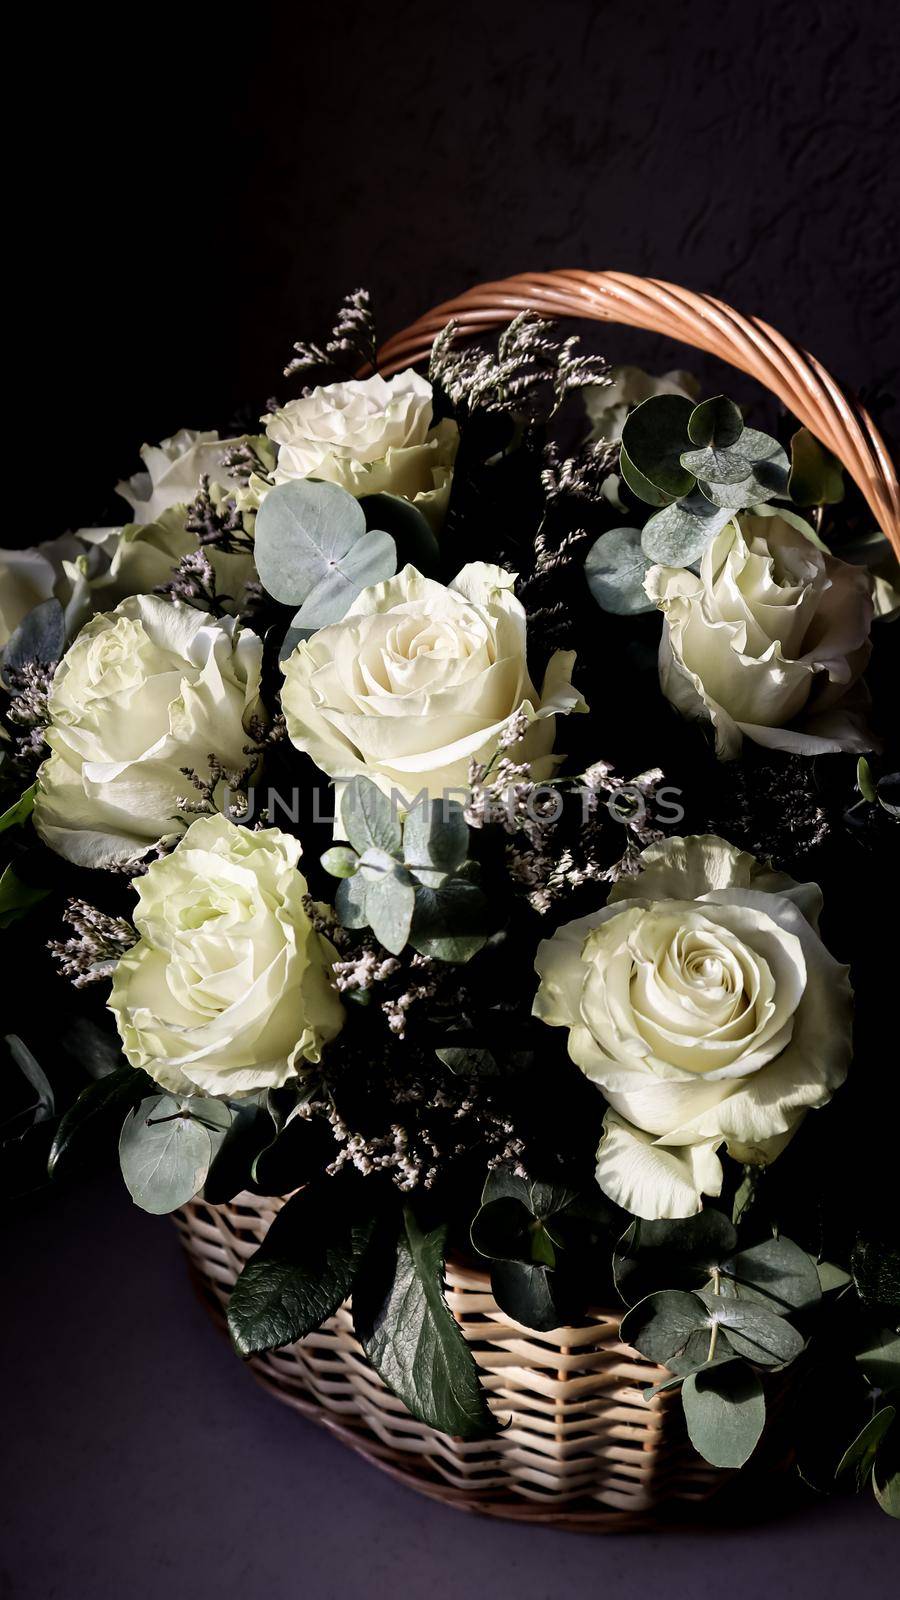 Bouquet of beautiful white roses in a wicker basket on a dark background. Perfect for greeting card by Olayola